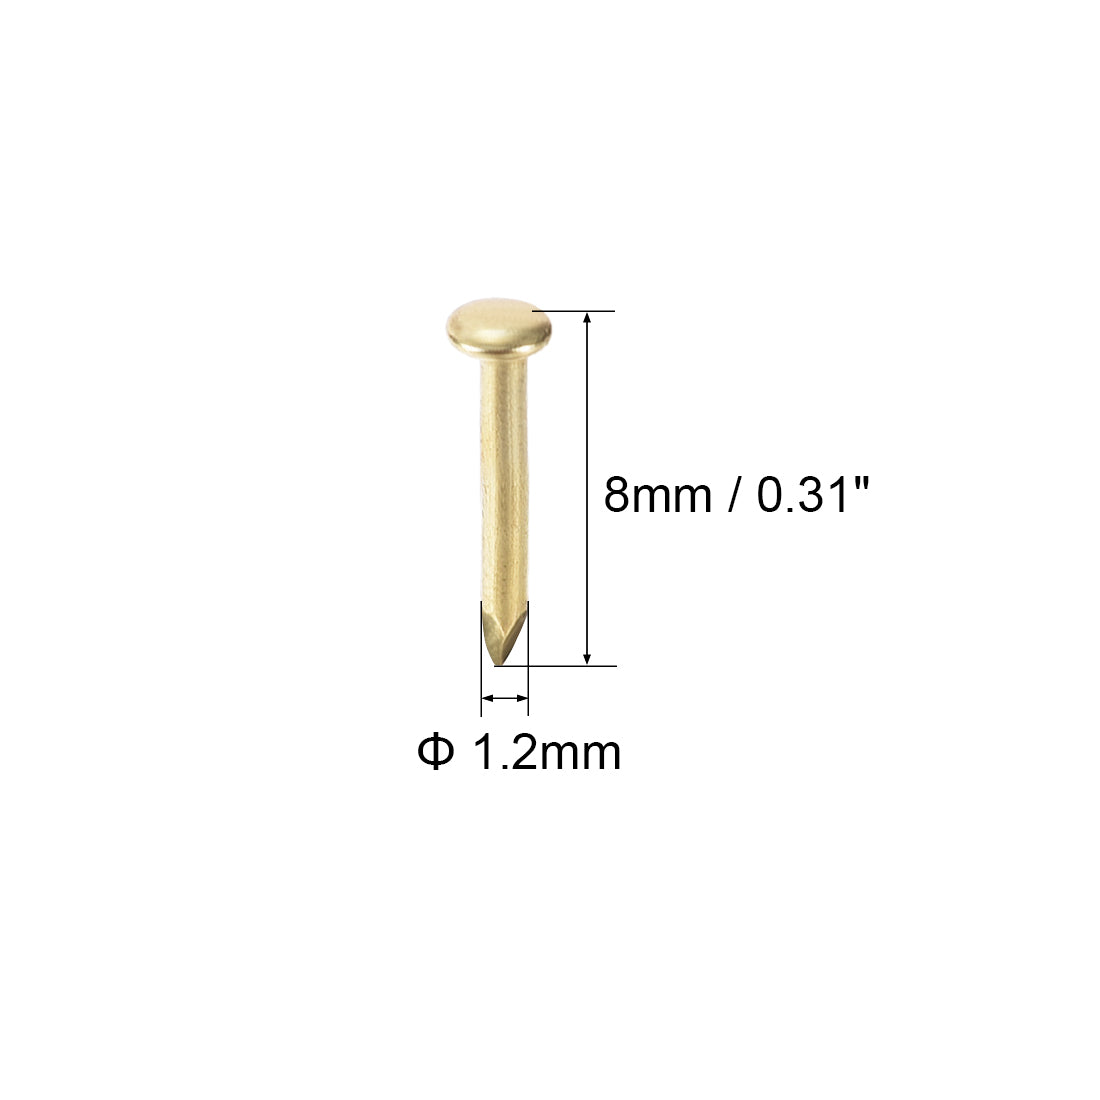 uxcell Uxcell Small Tiny Nails 1.2X8mm for DIY Decorative Pictures Wooden Boxes Household Accessories Gold Tone 500pcs